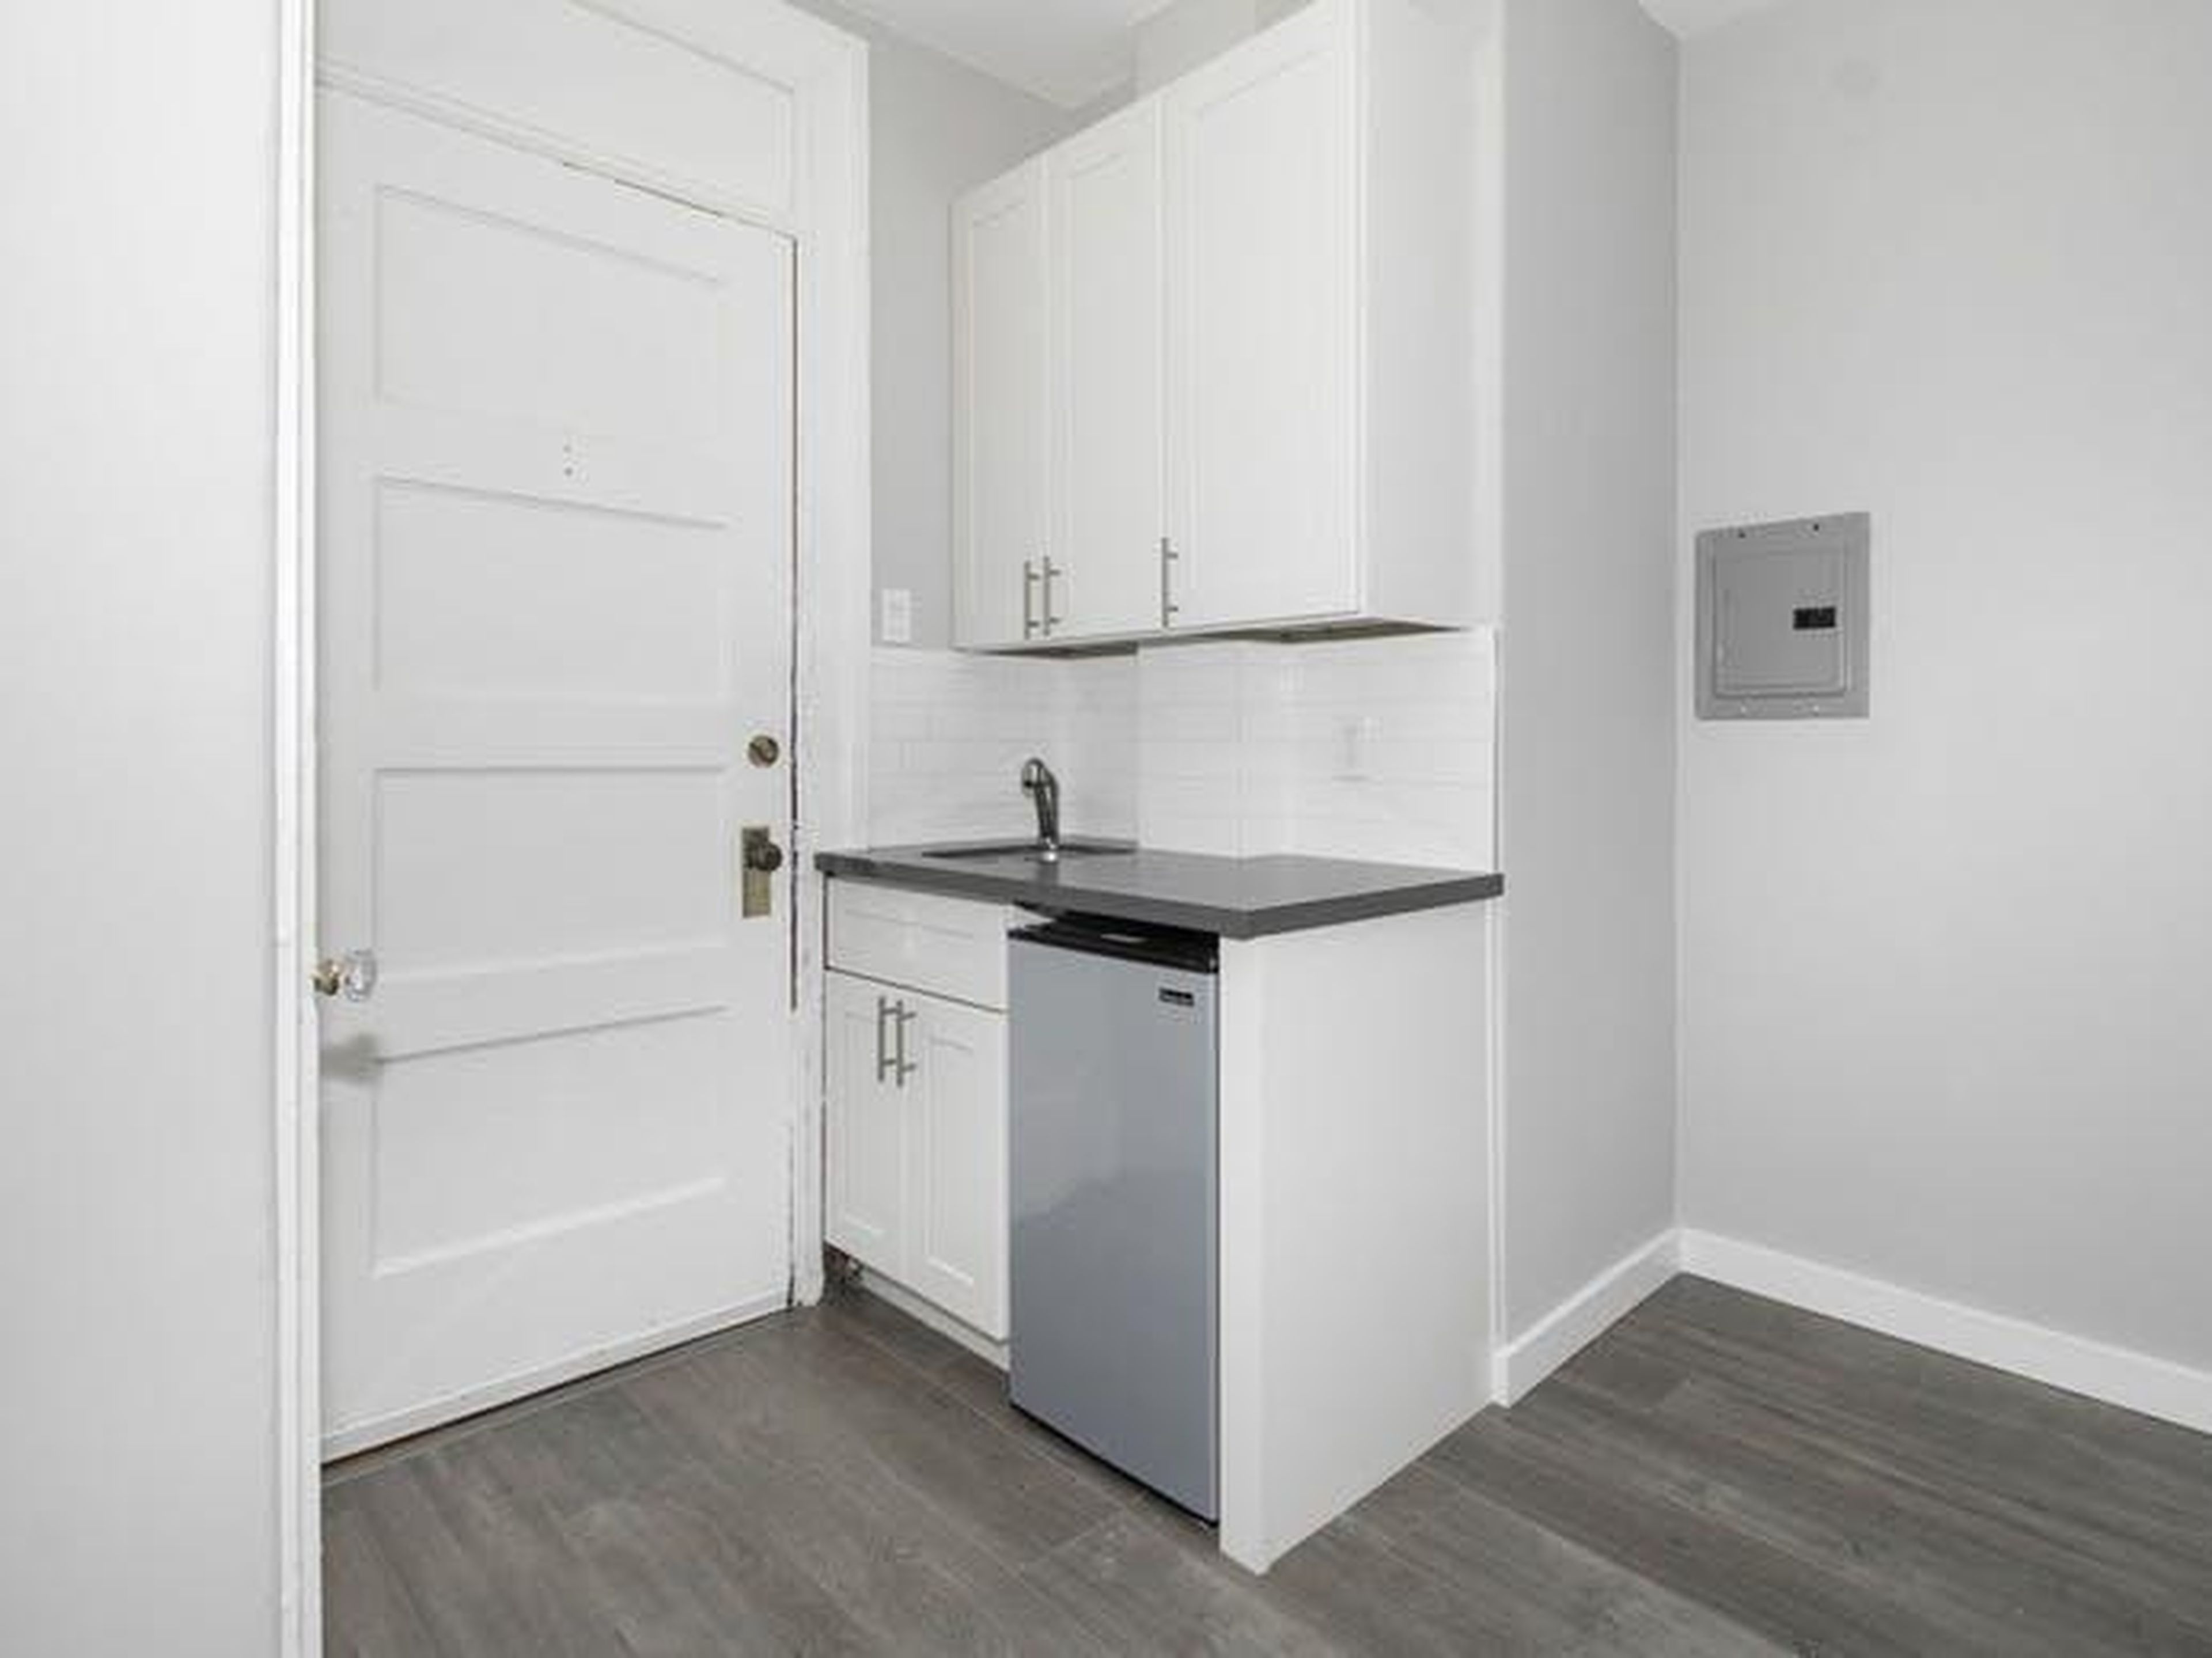 The sink, which can be seen below, is right next to the studio's front door — and the kitchen seems to consist of that, a mini fridge, and not much else.